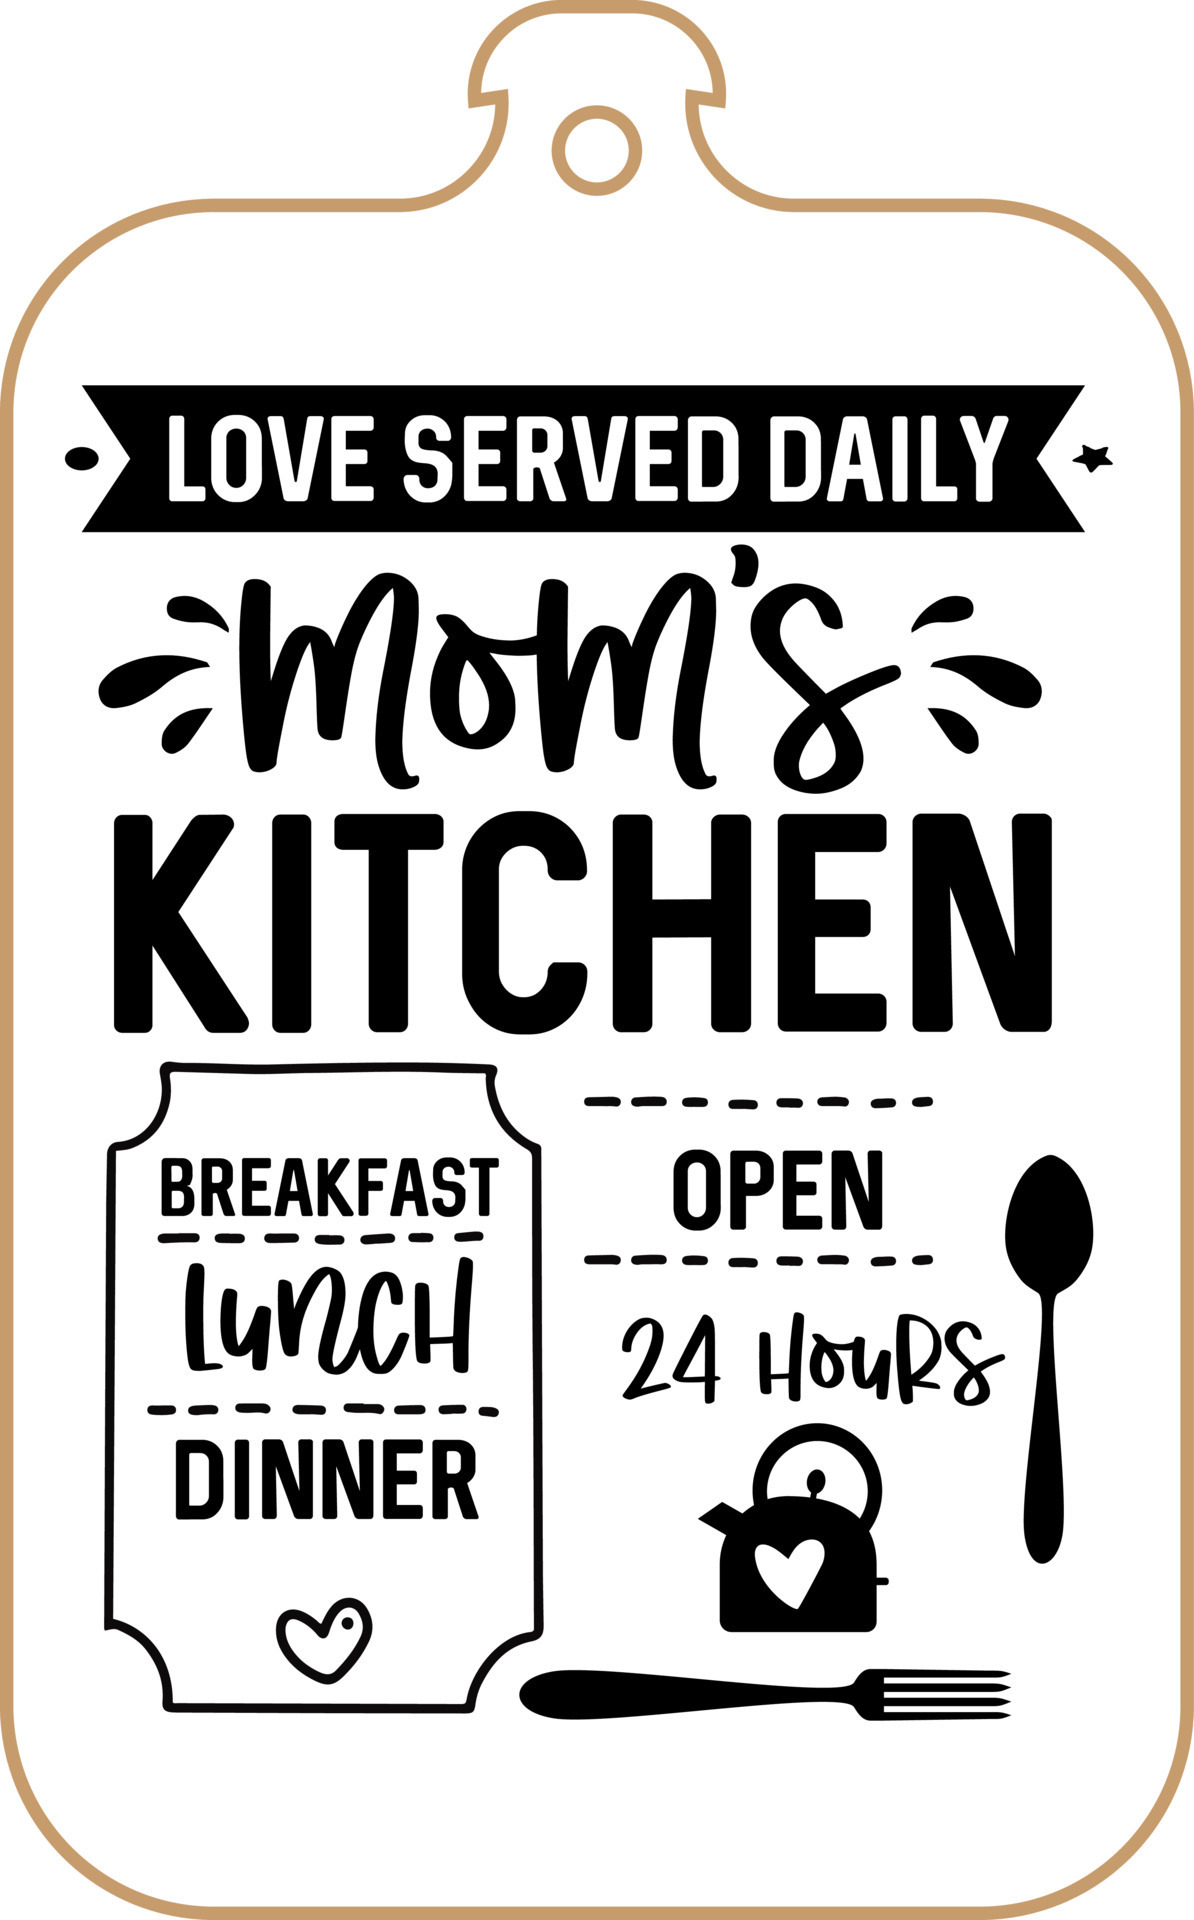 https://static.vecteezy.com/system/resources/previews/013/953/491/original/kitchen-apron-poster-design-with-cutting-board-text-hand-written-lettering-kitchen-wall-decoration-sign-quote-cooking-kitchen-quote-saying-love-served-daily-mom-s-kitchen-breakfast-lunch-vector.jpg